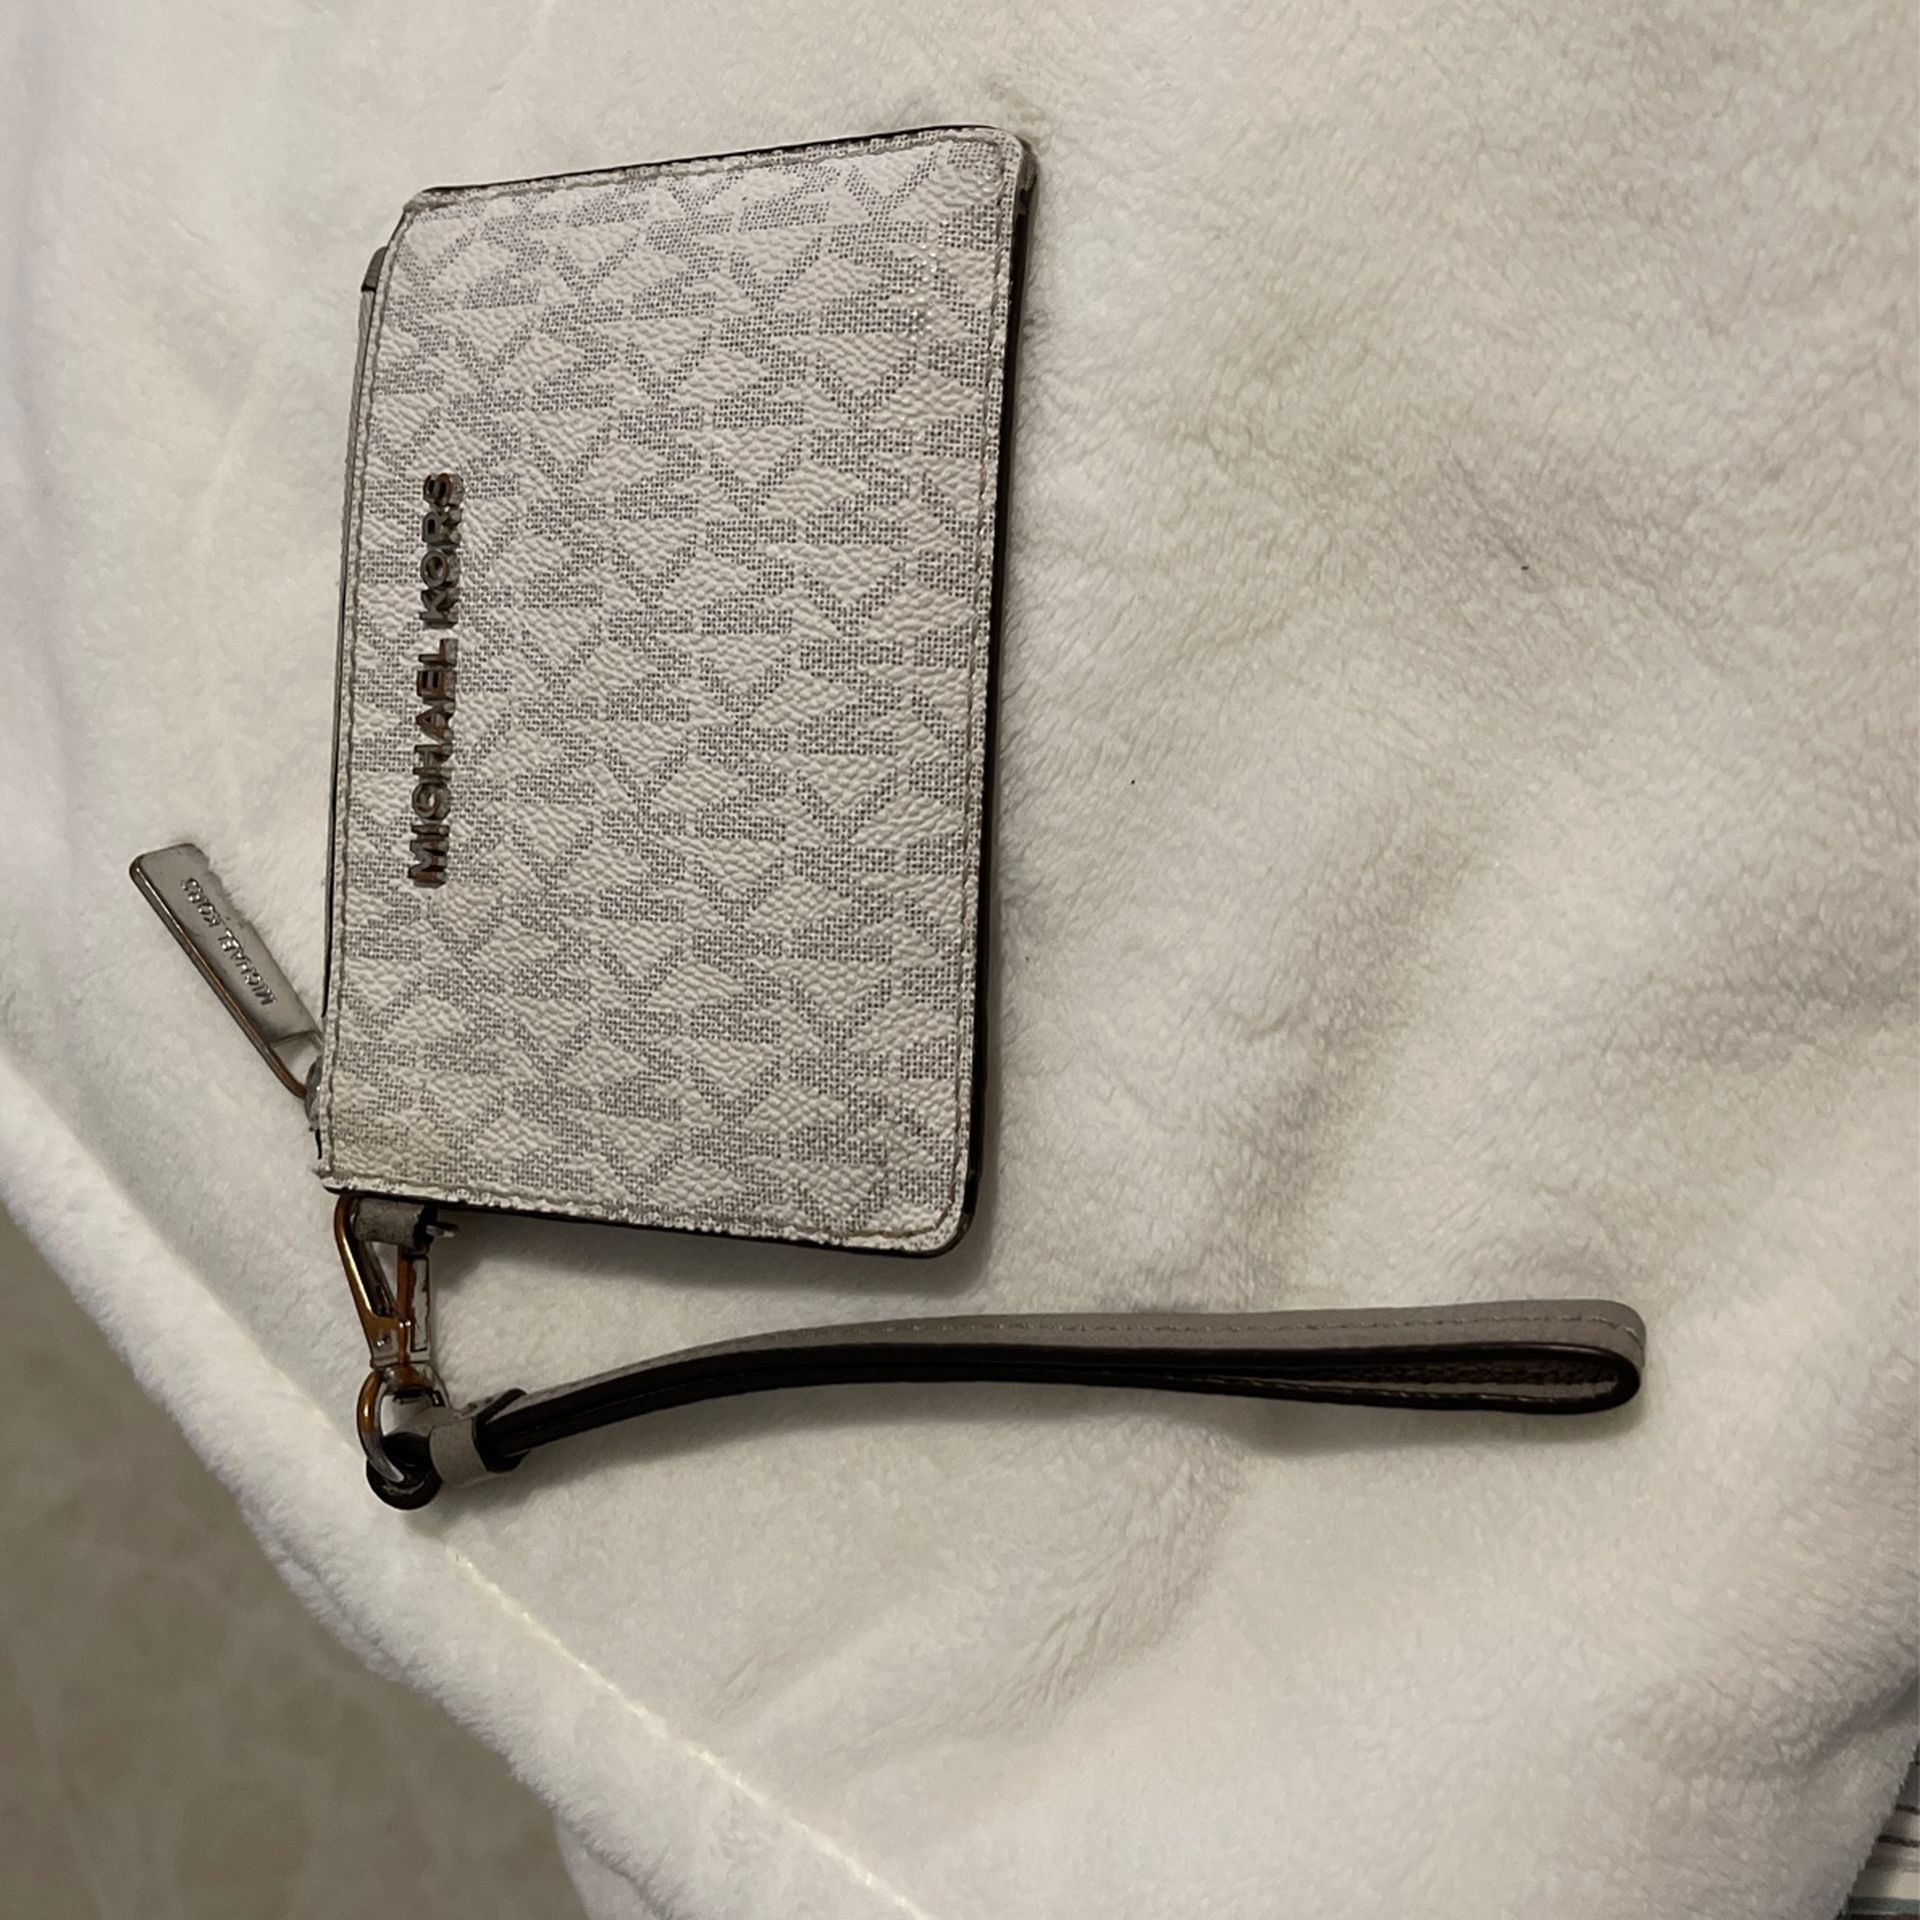 Small Micheal Kors Wallet, White w/ Gray MK letters